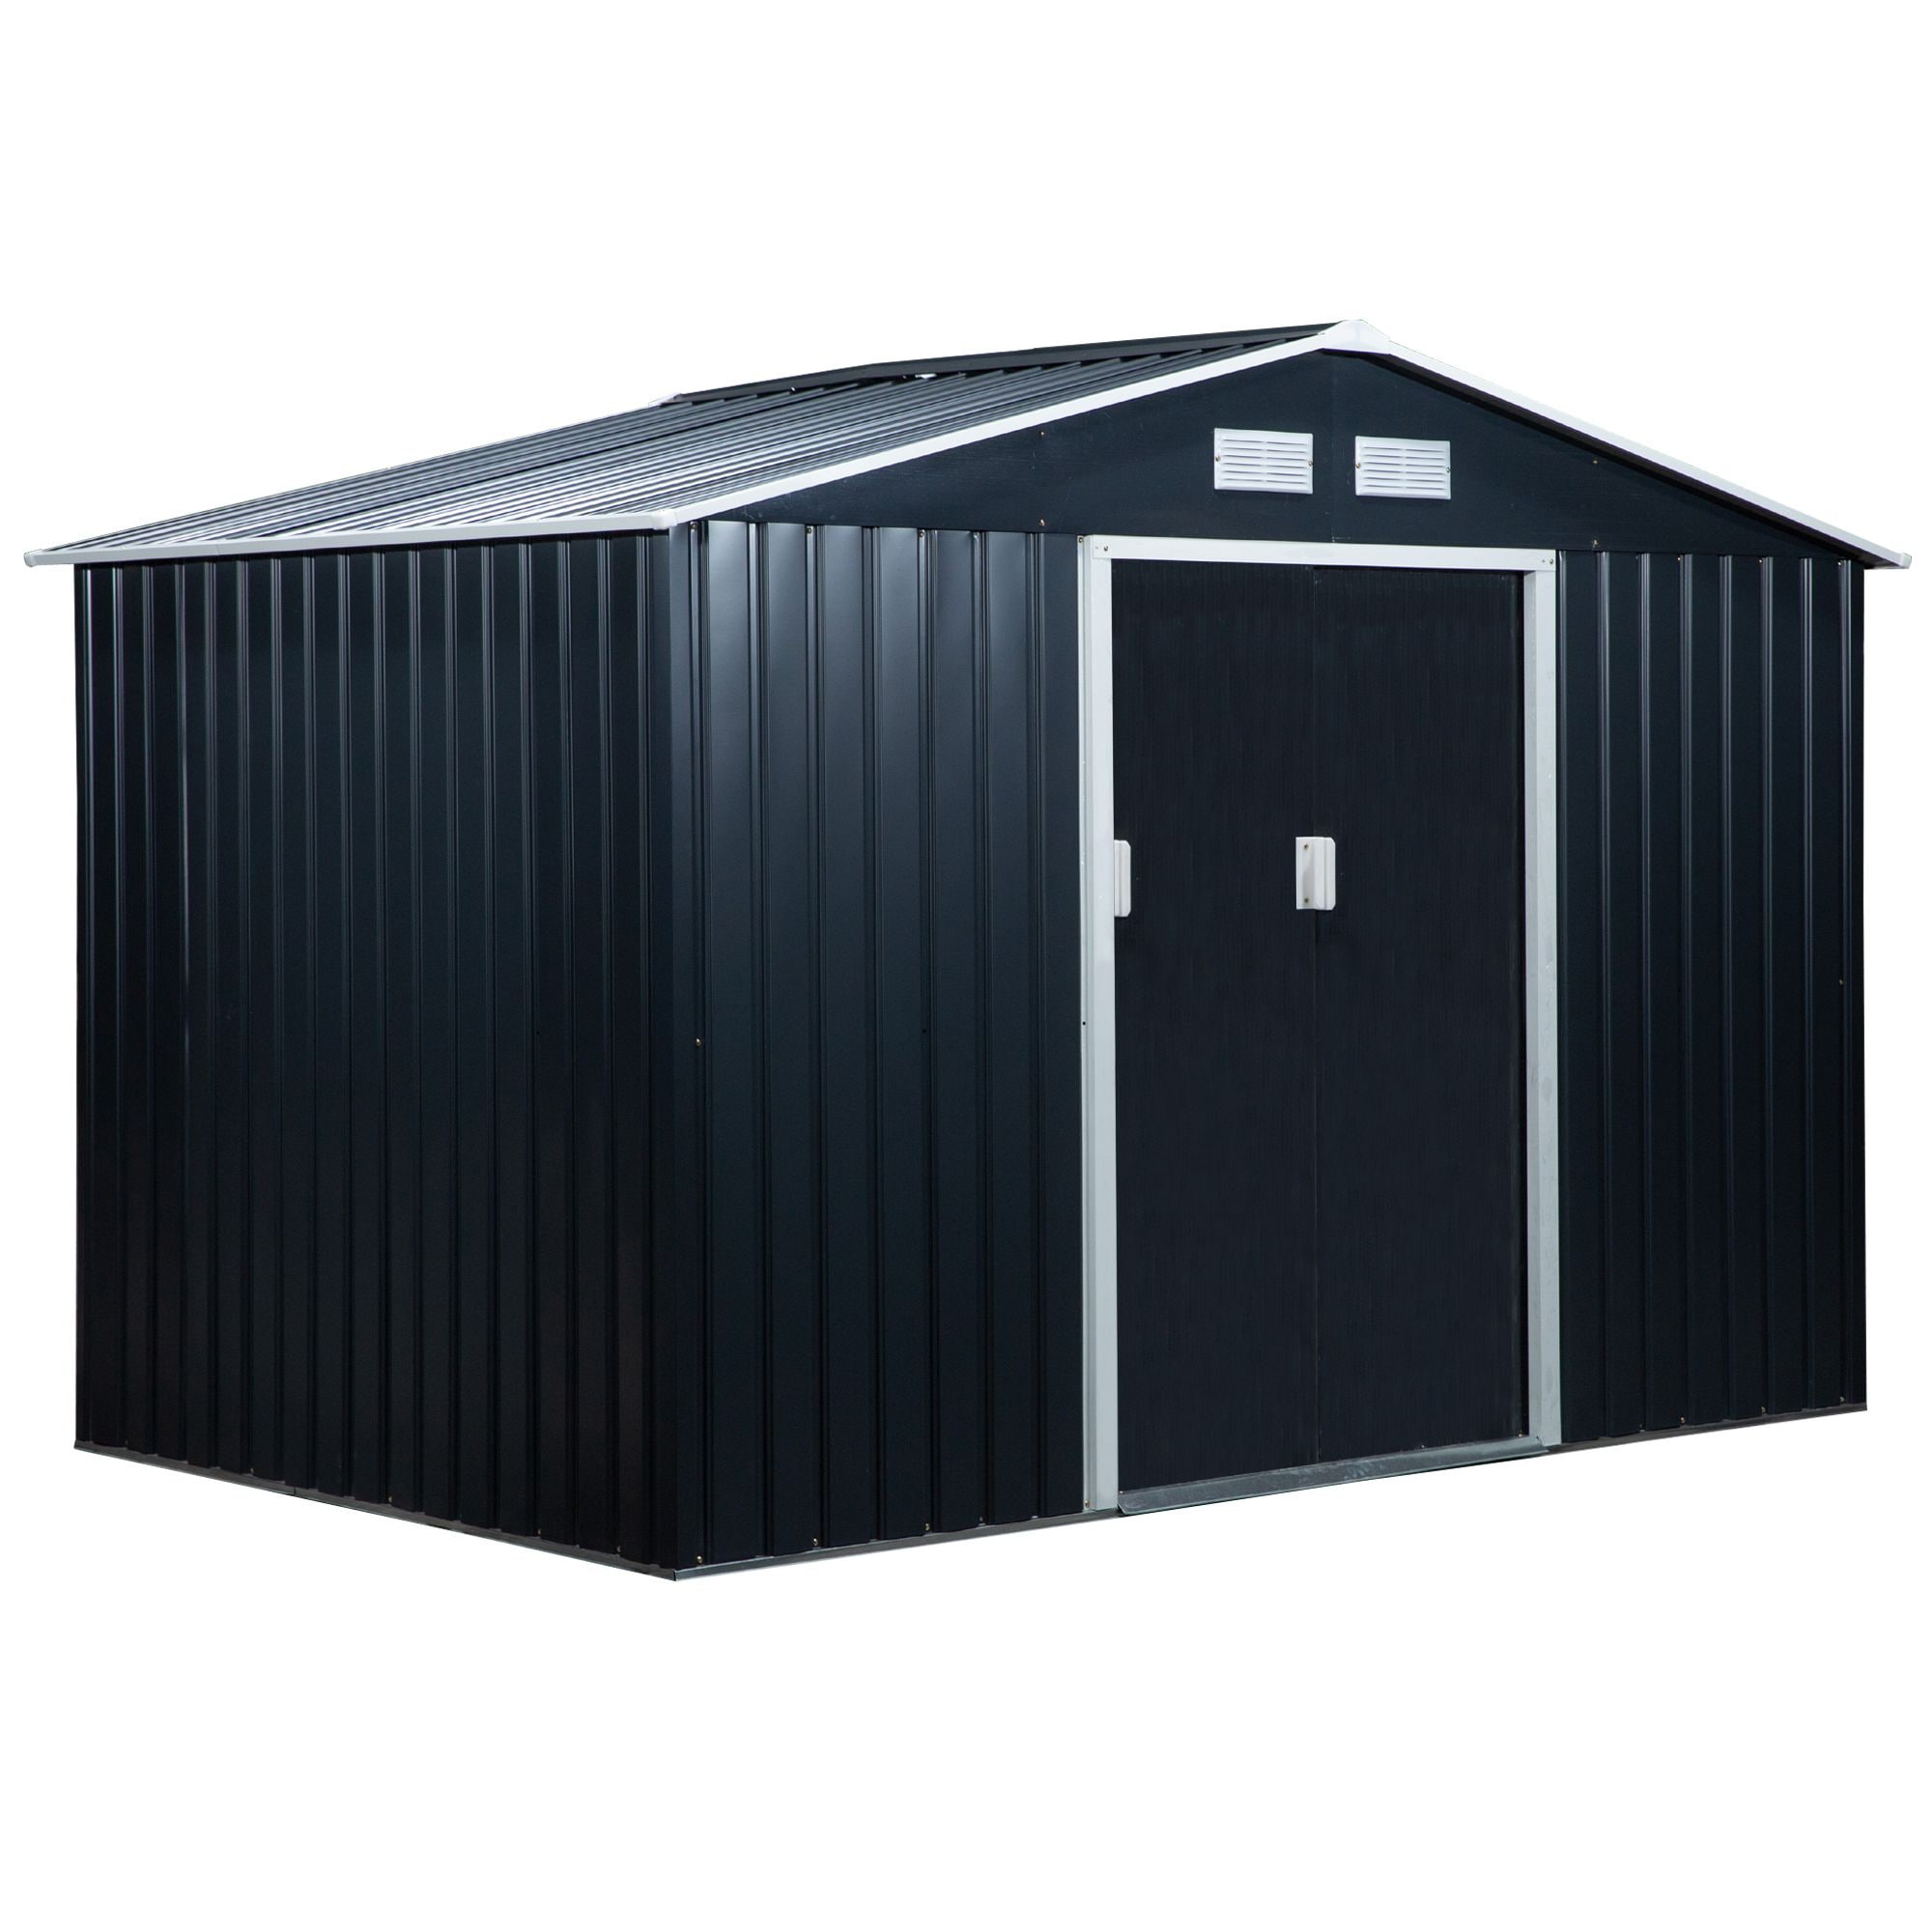 Outdoor tool storage sheds at Brookstone  Garden tool shed, Garden storage  shed, Outdoor storage sheds